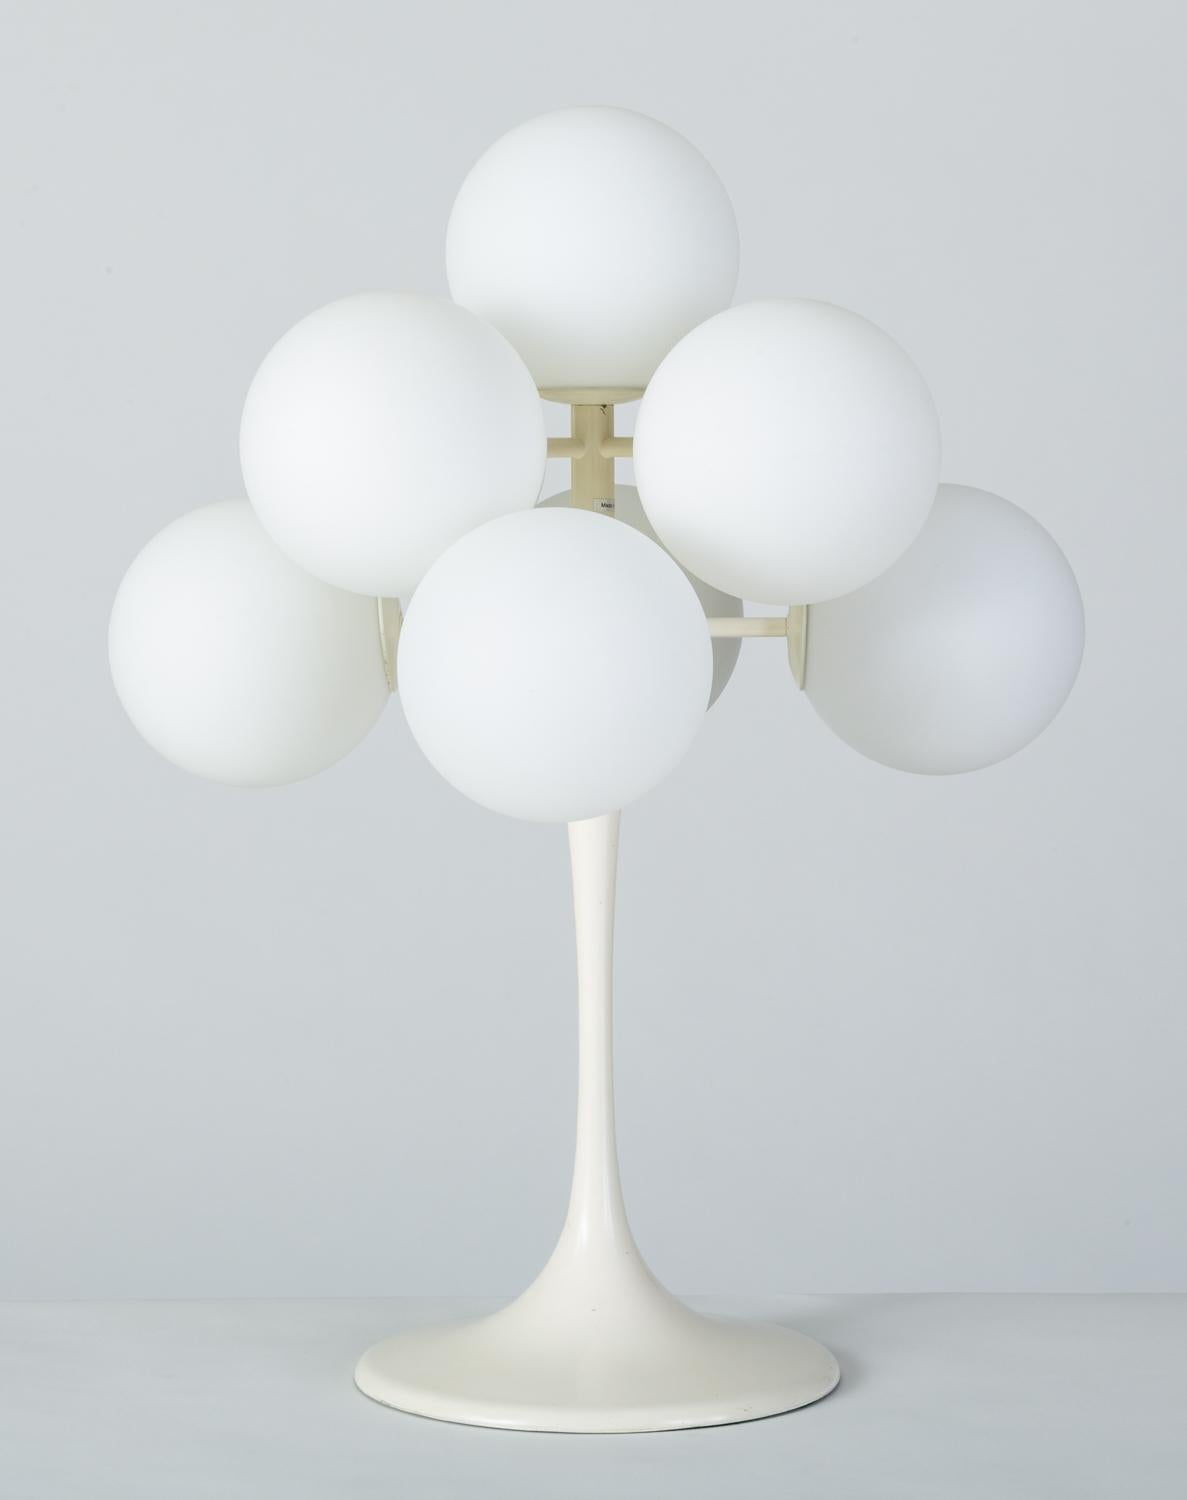 Commonly mis-attributed to Swiss architect and Industrial designer Max Bill, this series of globe lamps - known as the “Figuration” line - were actually designed by Eva Renée Nele for German-Swiss lighting manufacturer Temde Leuchten. This example,